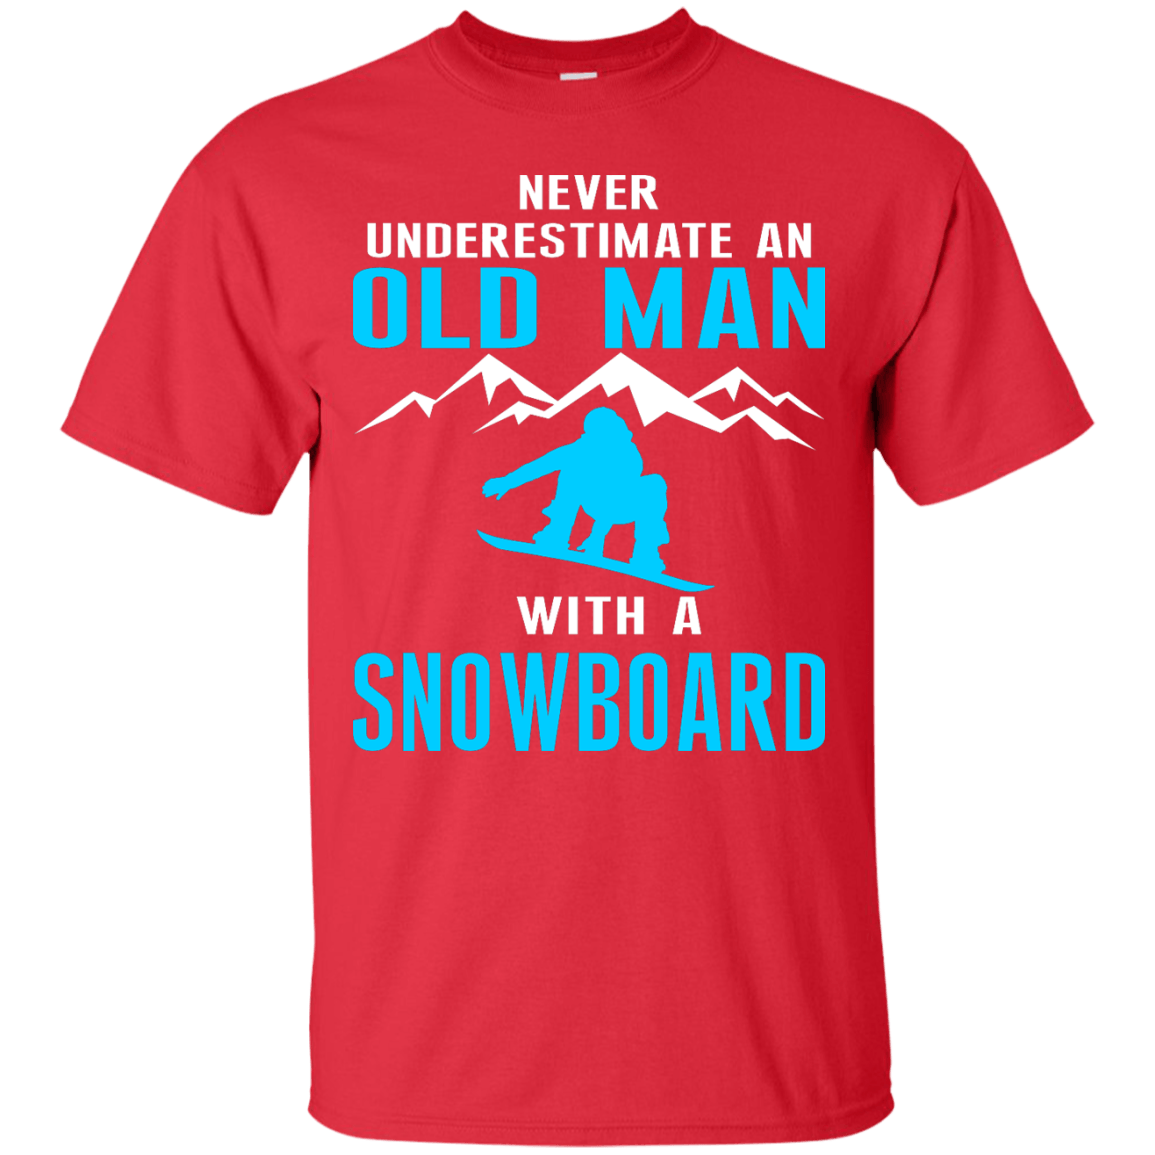 Never Underestimate An Old Man With A Snowboard Tees - Powderaddicts